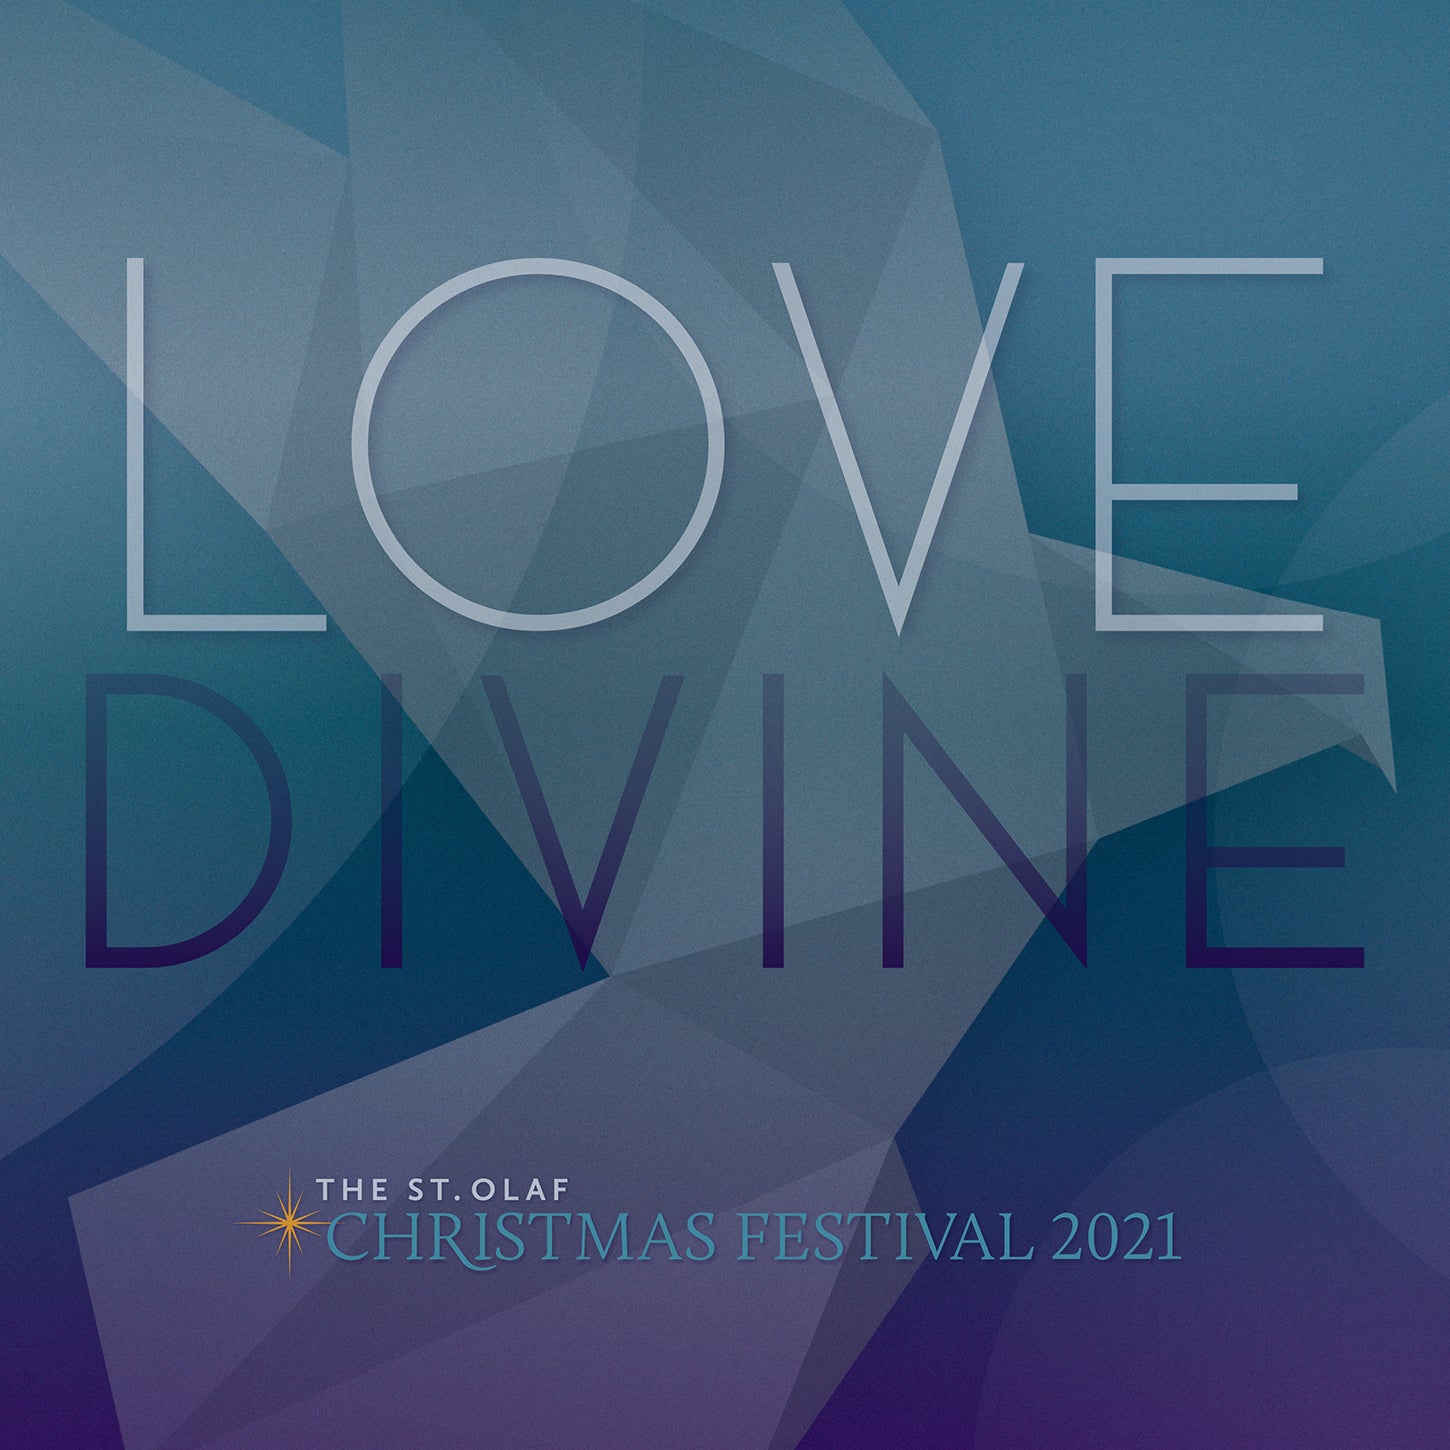 Love Divine: 2021 St. Olaf Christmas Festival / St. Olaf College Orchestra and Choirs